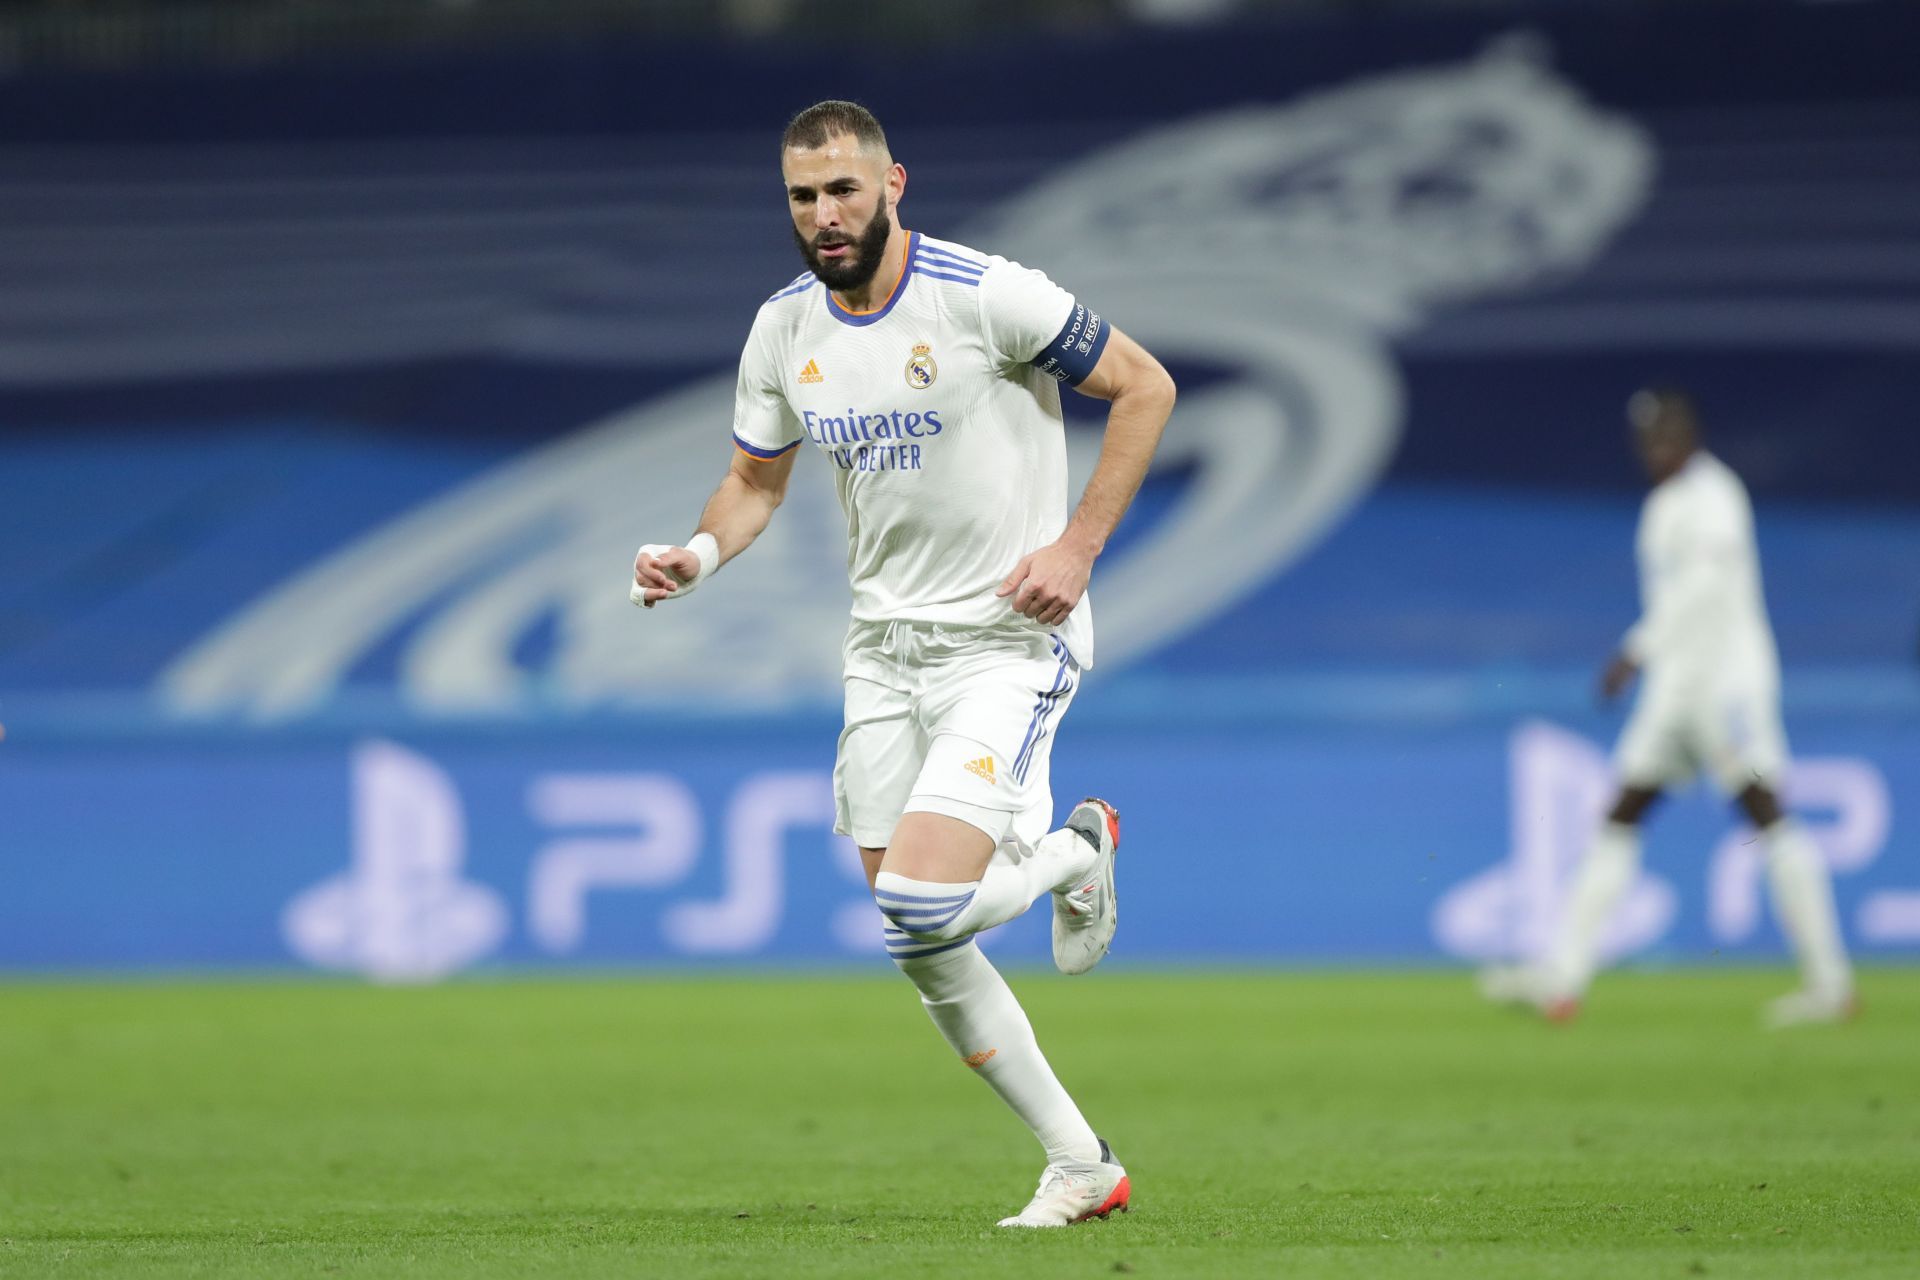 Karim Benzema is willing to move to Manchester City if he leaves Real Madrid this summer.